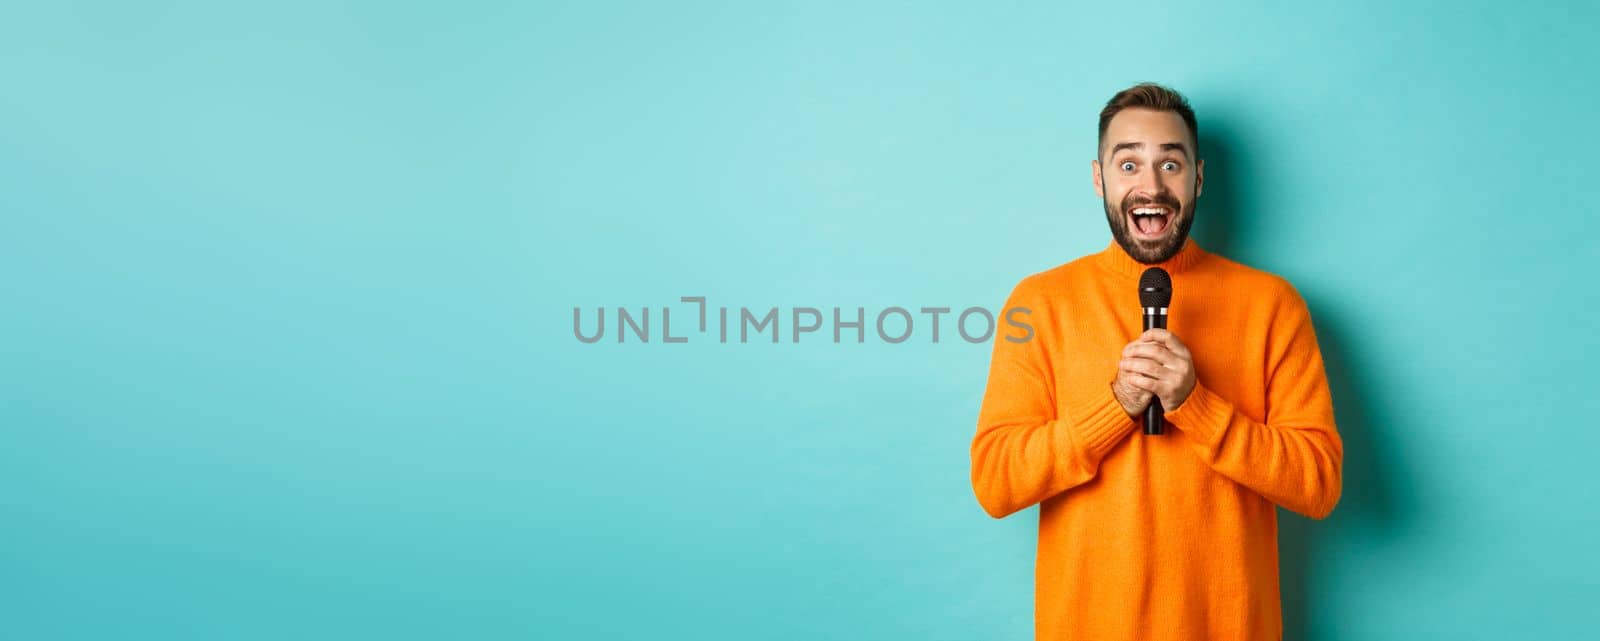 Happy adult man singing karaoke, holding microphone and looking at camera, standing in orange sweater against turquoise background.